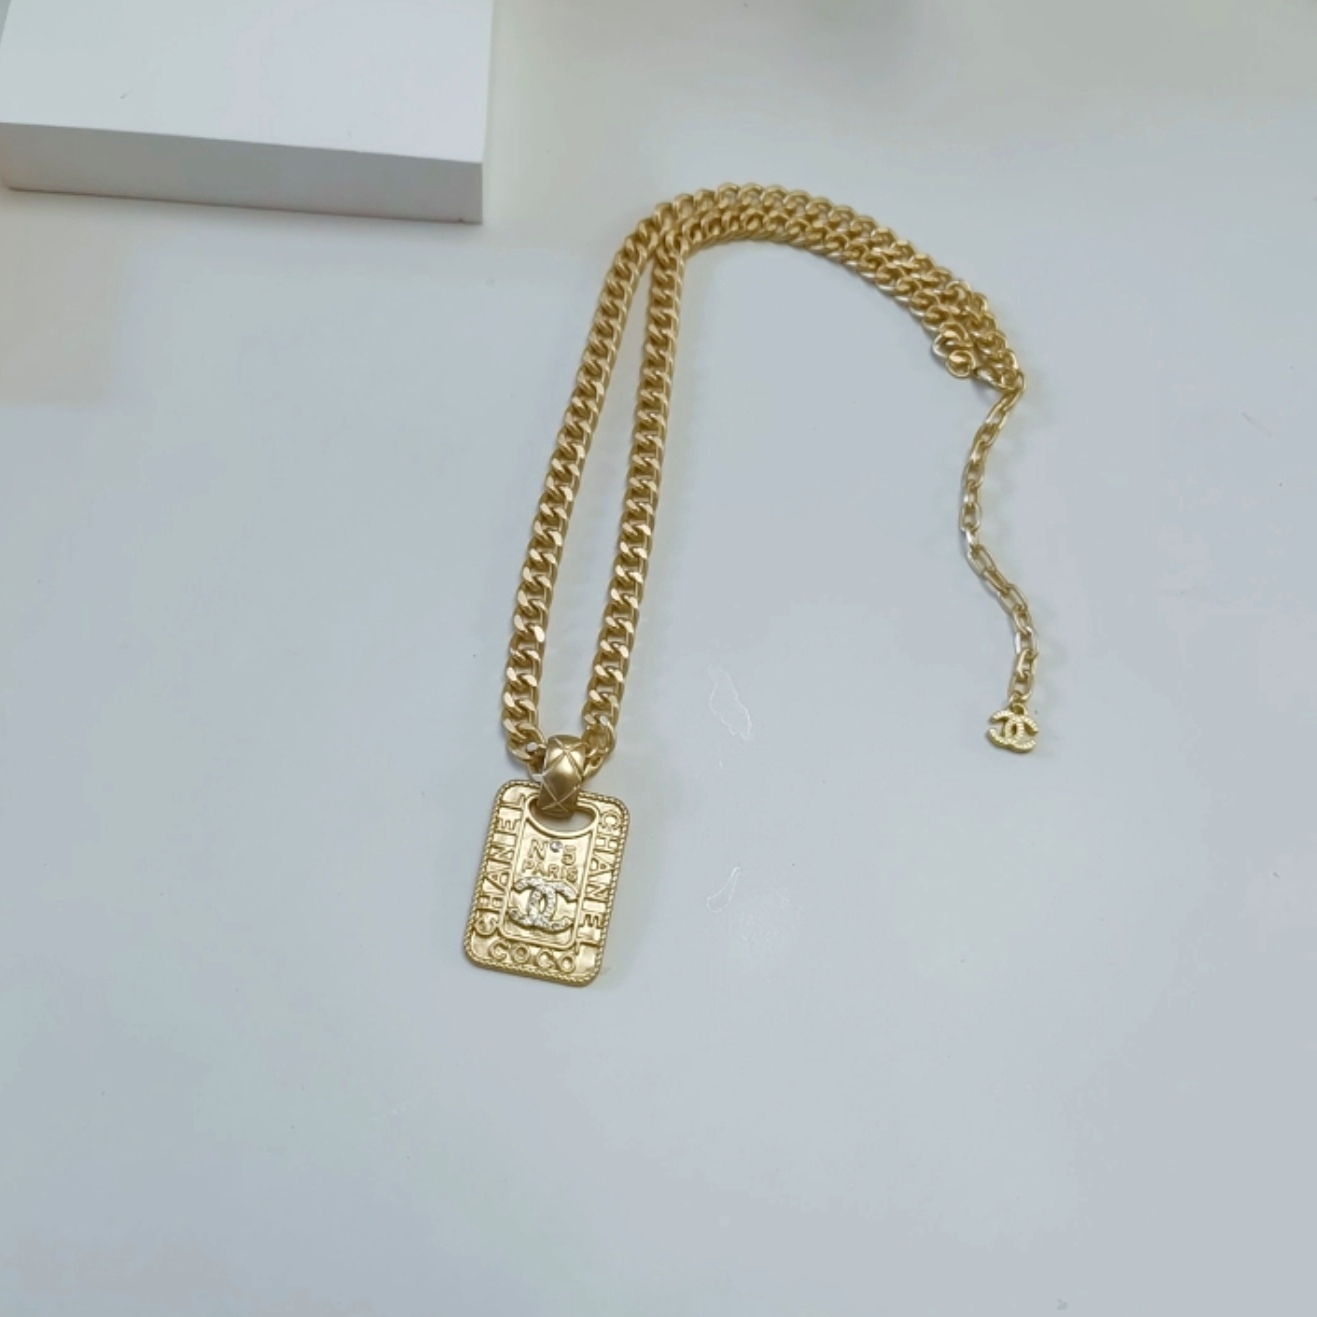 Chanel necklace 107637